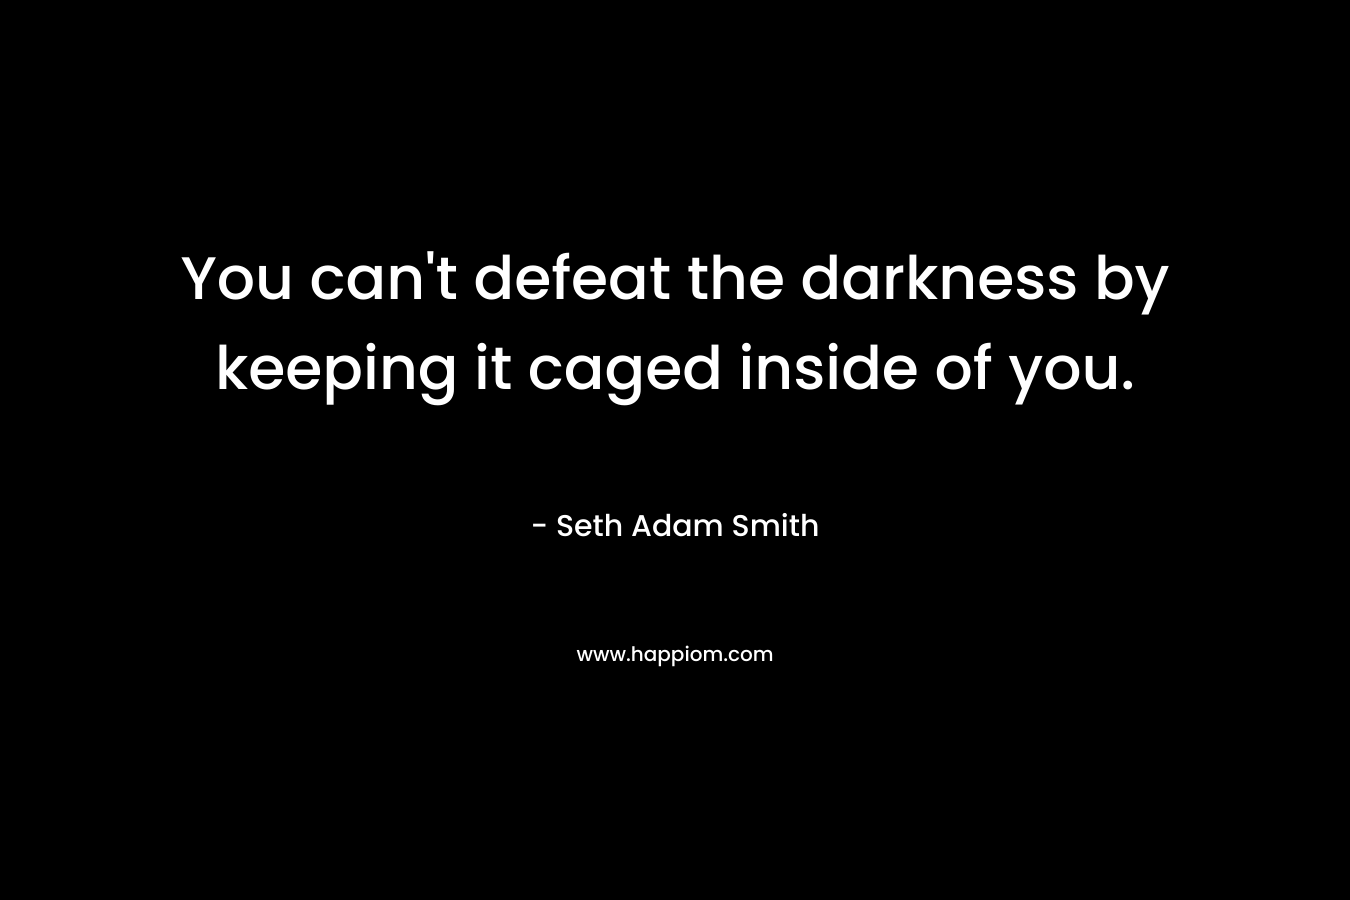 You can't defeat the darkness by keeping it caged inside of you.